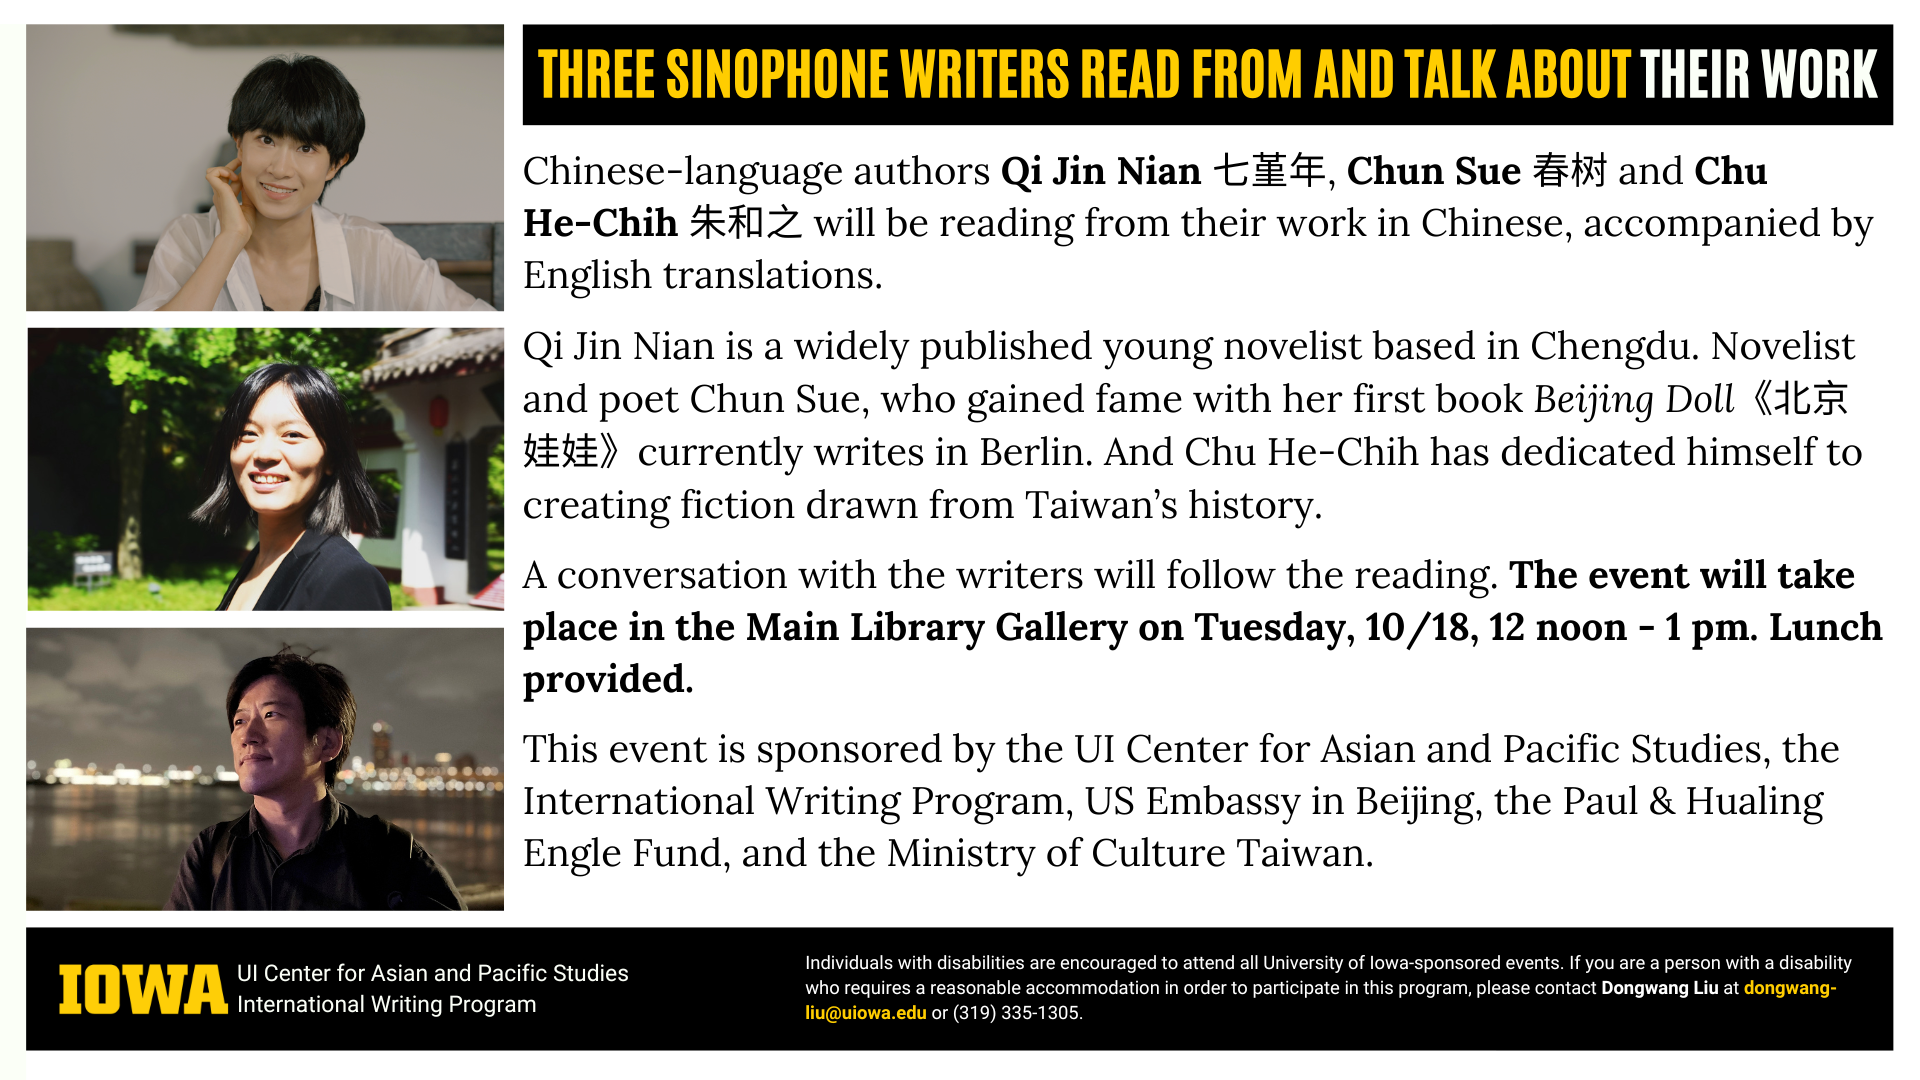 An ad featuring three portraits of authors named below and the following text: "Three Sinophone Writers Read From and Talk About Their Work. Chinese-language authors Qi Jin Nian 七堇年, Chun Sue 春树 and Chu He-Chih 朱和之 will be reading from their work in Chinese, accompanied by English translations. Qi Jin Nian is a widely published young novelist based in Chengdu. Novelist and poet Chun Sue, who gained fame with her first book Beijing Doll《北京娃娃》currently writes in Berlin. And Chu He-Chih has dedicated himself to creating fiction drawn from Taiwan’s history. A conversation with the writers will follow the reading. The event will take place in the Main Library Gallery on Tuesday, 10/18, 12 noon - 1 pm. Lunch provided. This event is sponsored by the UI Center for Asian and Pacific Studies, the International Writing Program, US Embassy in Beijing, the Paul & Hualing Engle Fund, and the Ministry of Culture Taiwan. Individuals with disabilities are encouraged to attend all University of Iowa-sponsored events. If you are a person with a disability who requires a reasonable accommodation in order to participate in this program, please contact Dongwang Liu at dongwang-liu@uiowa.edu or (319) 335-1305."